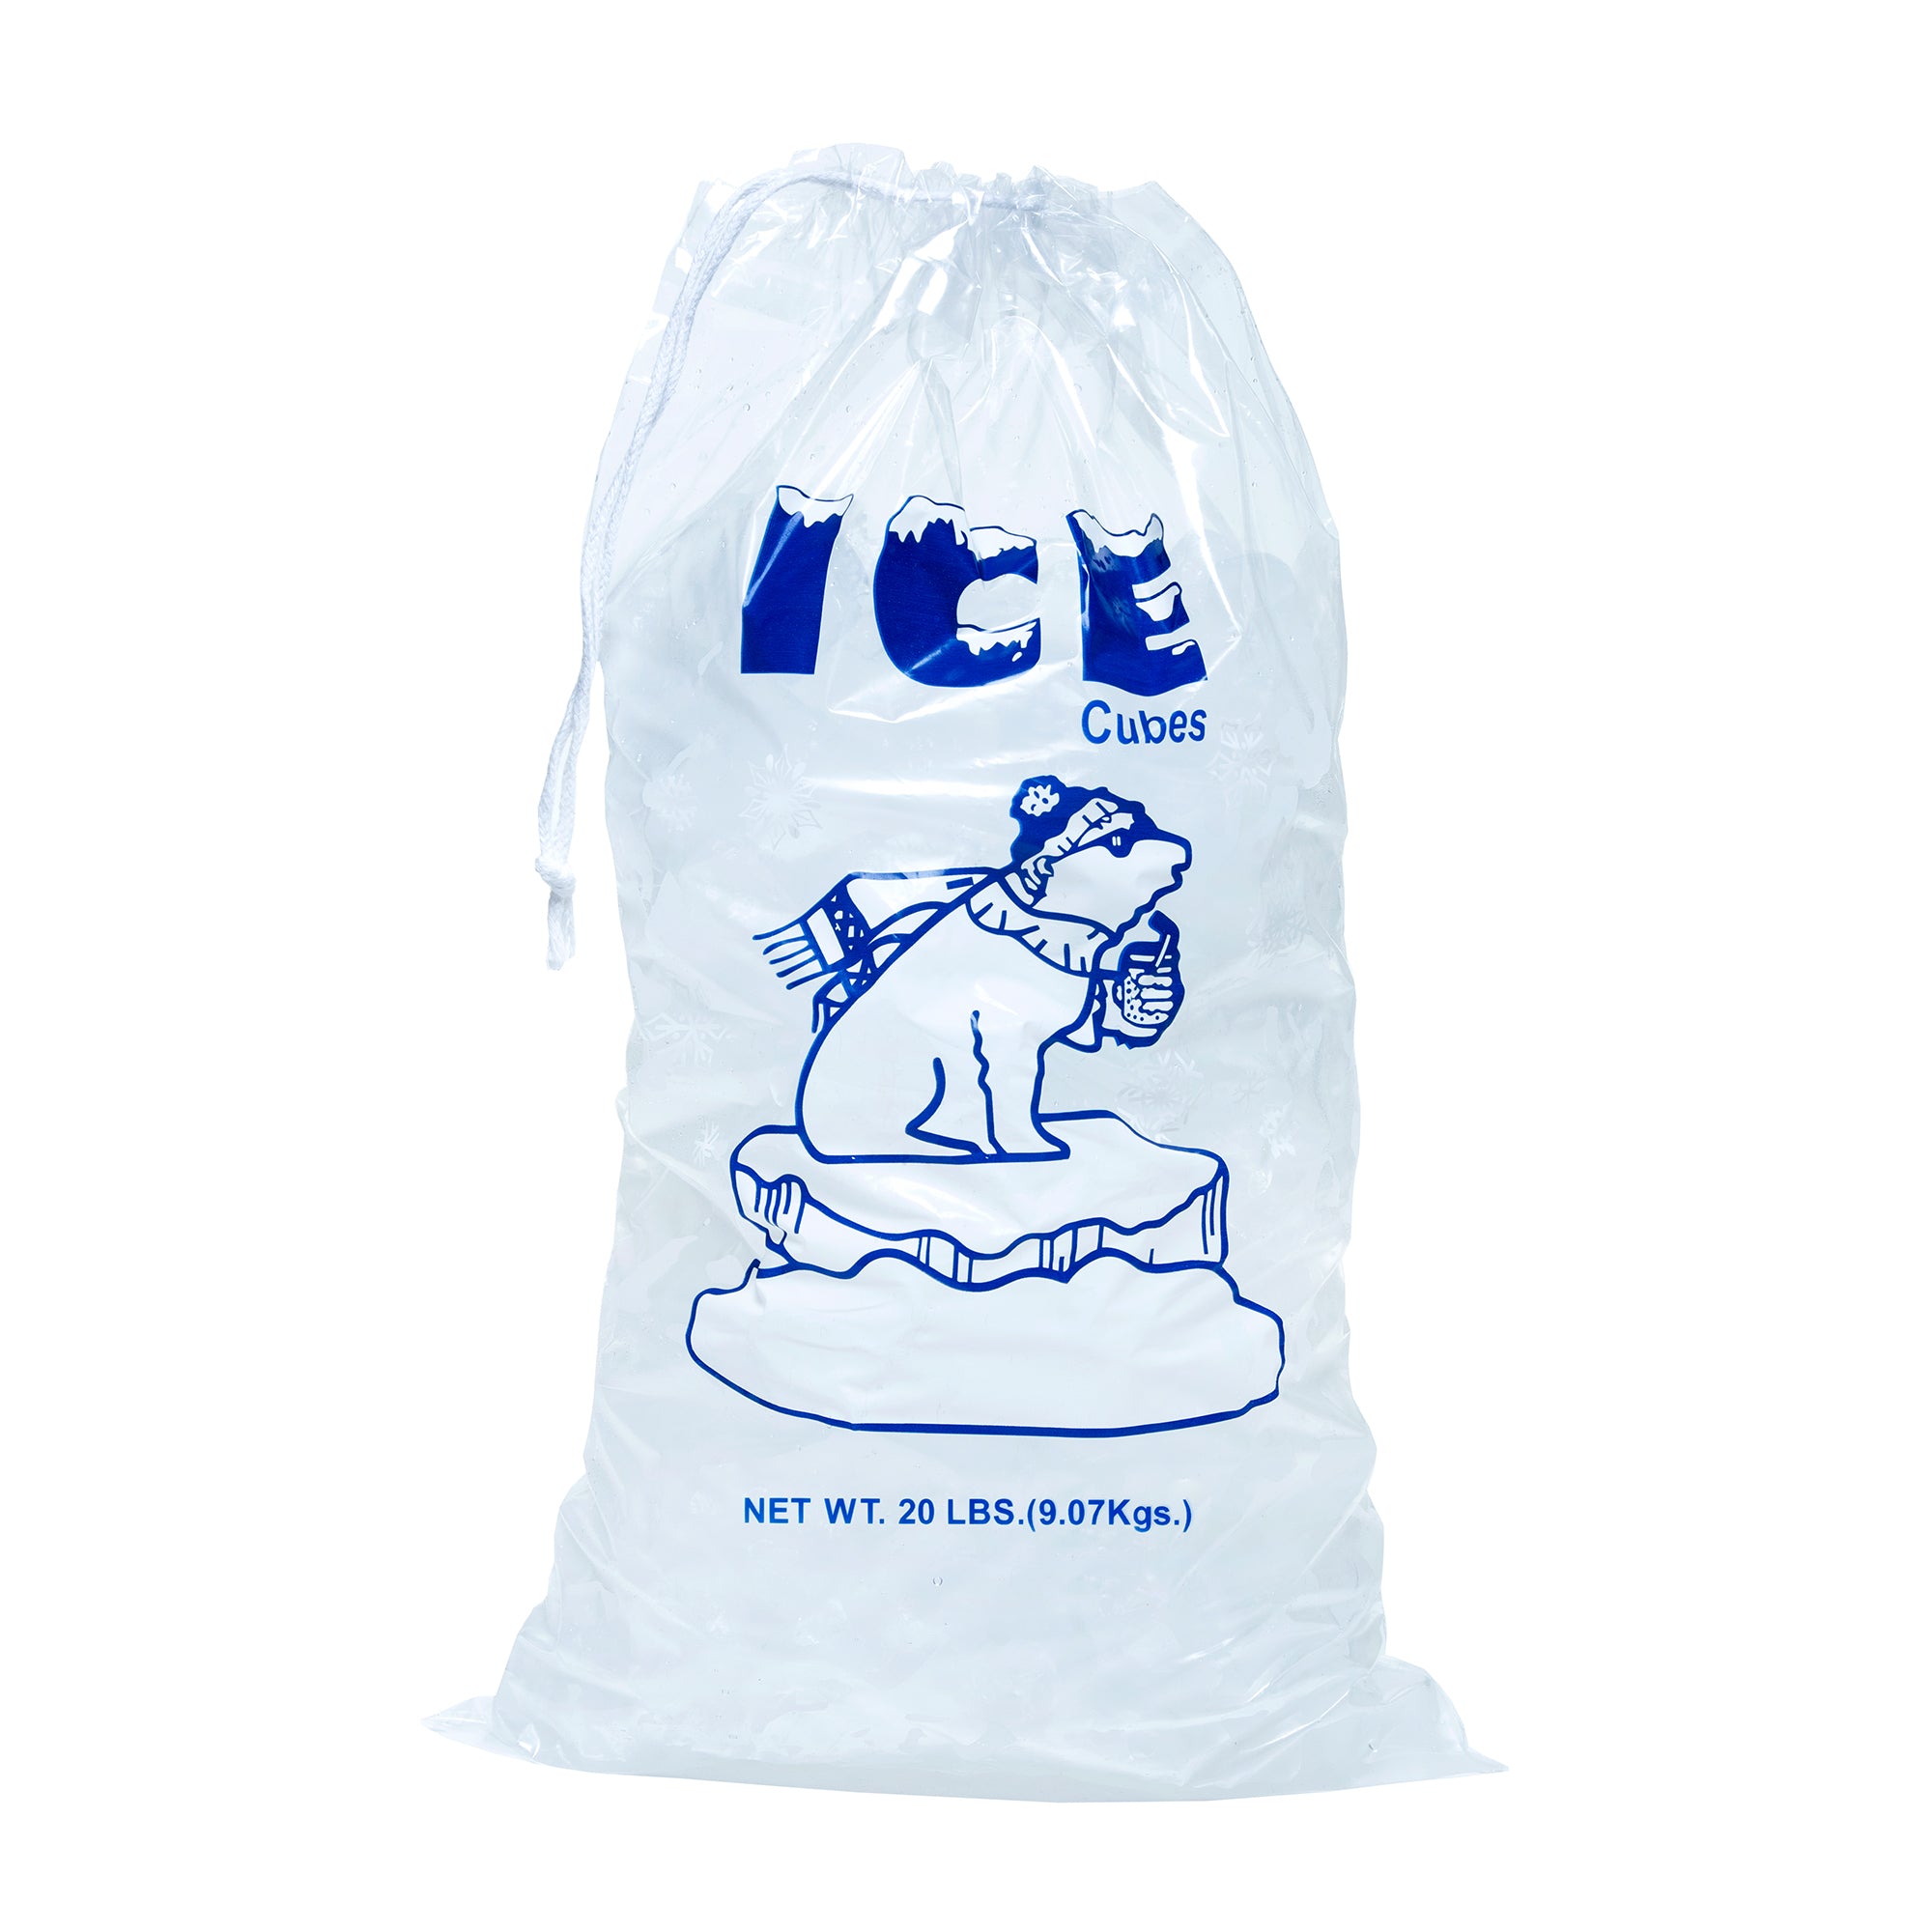 20 lbs ice bag with cotton drawstring